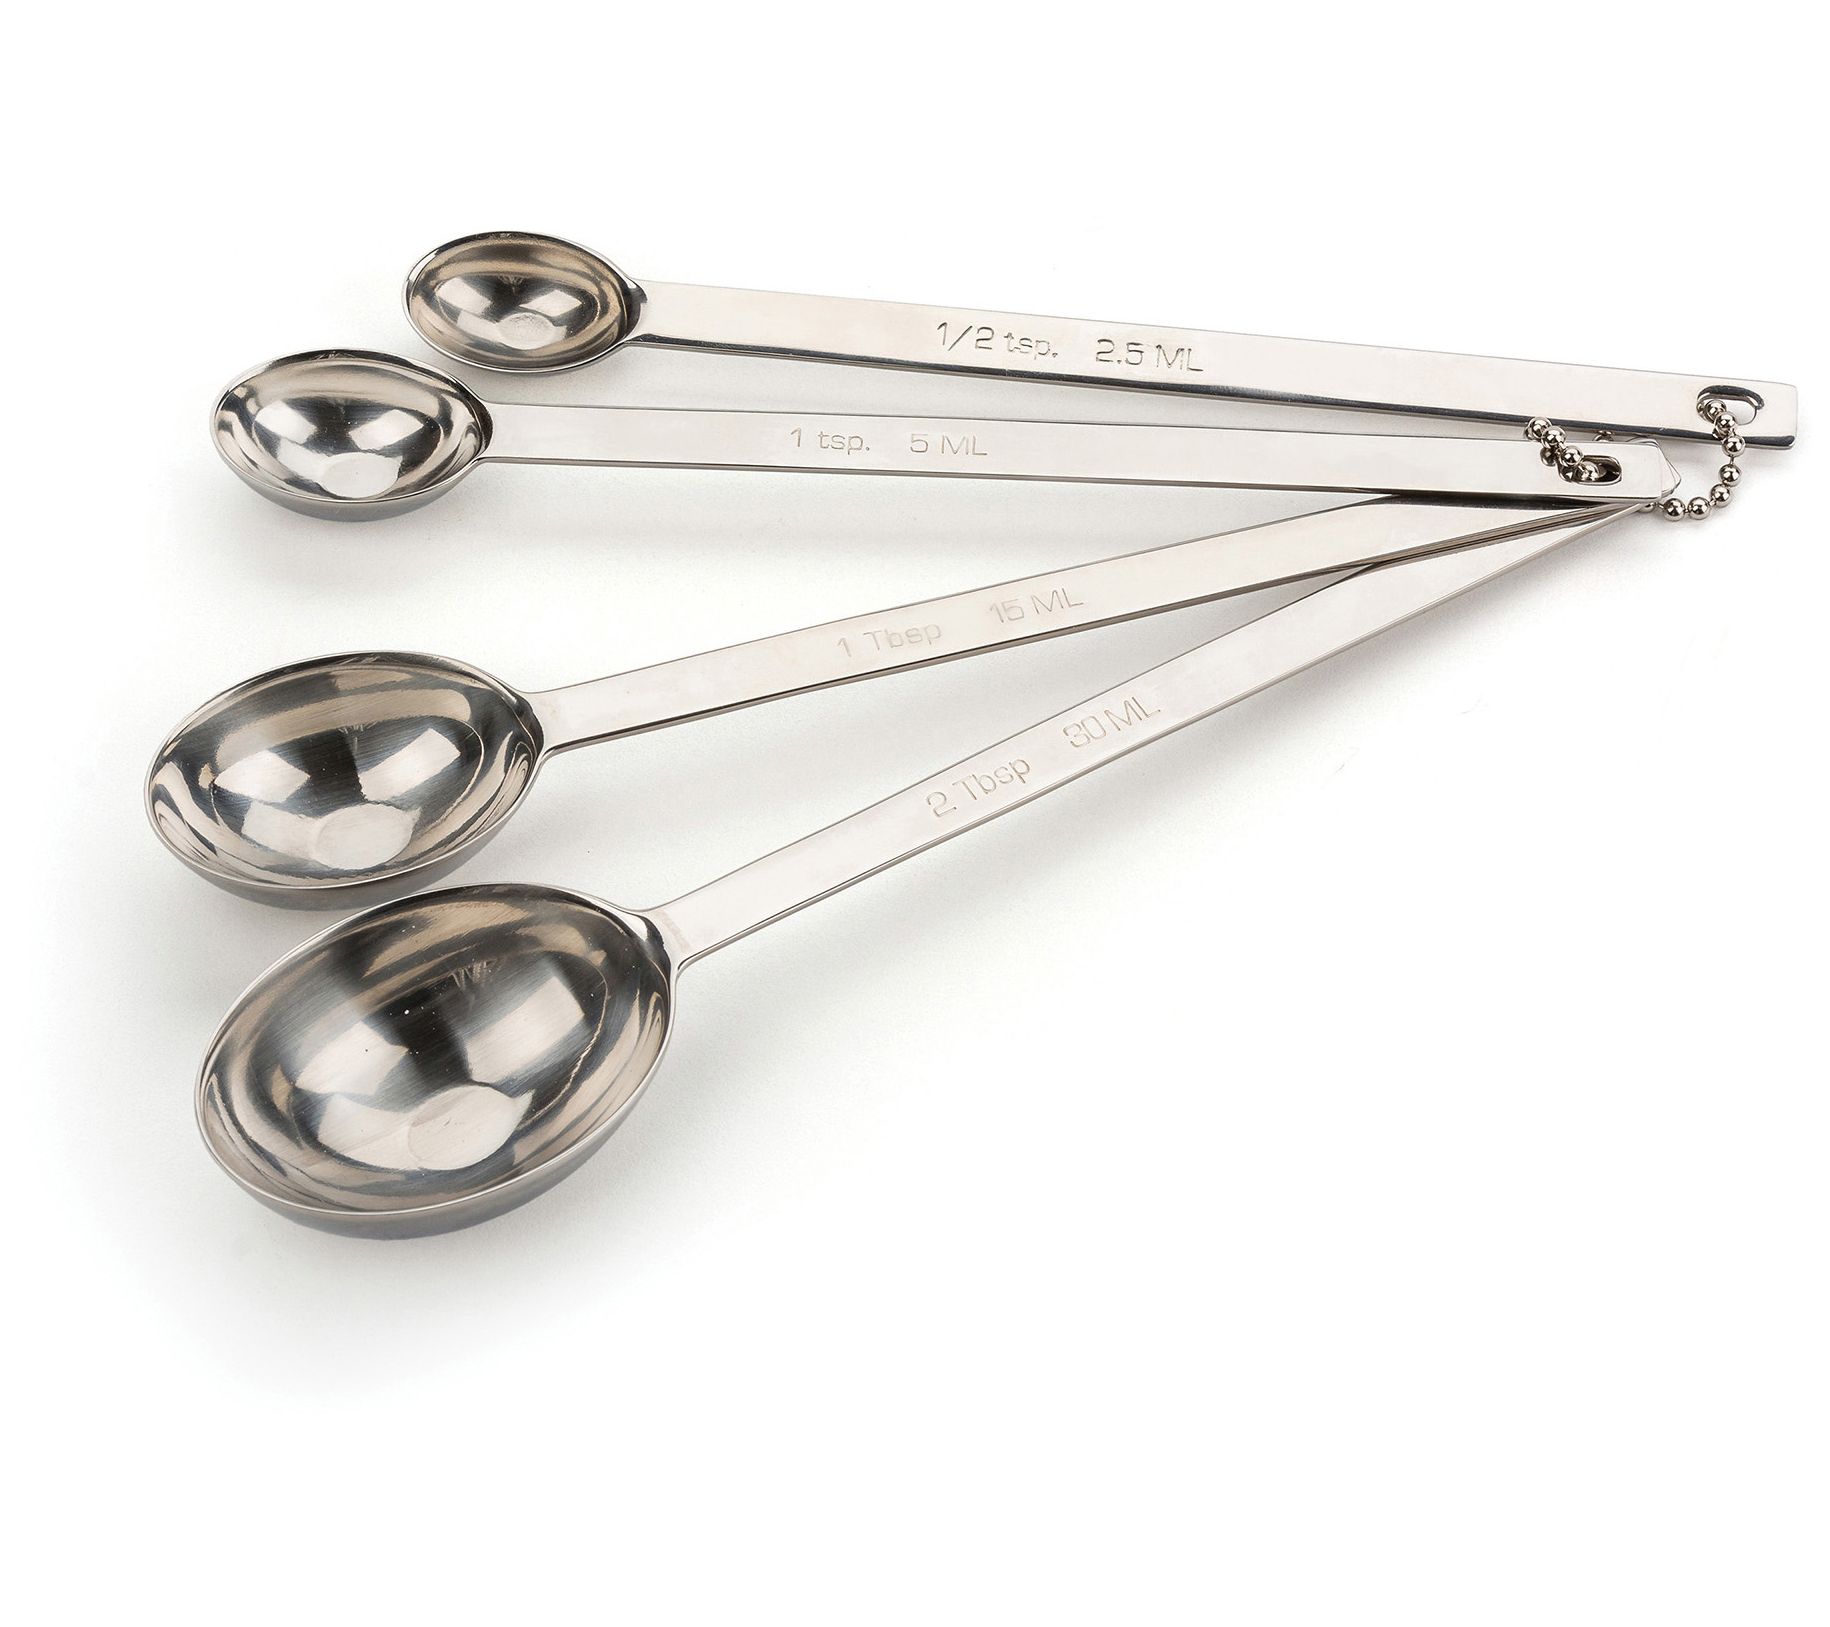 Martha Stewart Stainless Steel 4-pc. Measuring Spoon, Color: St